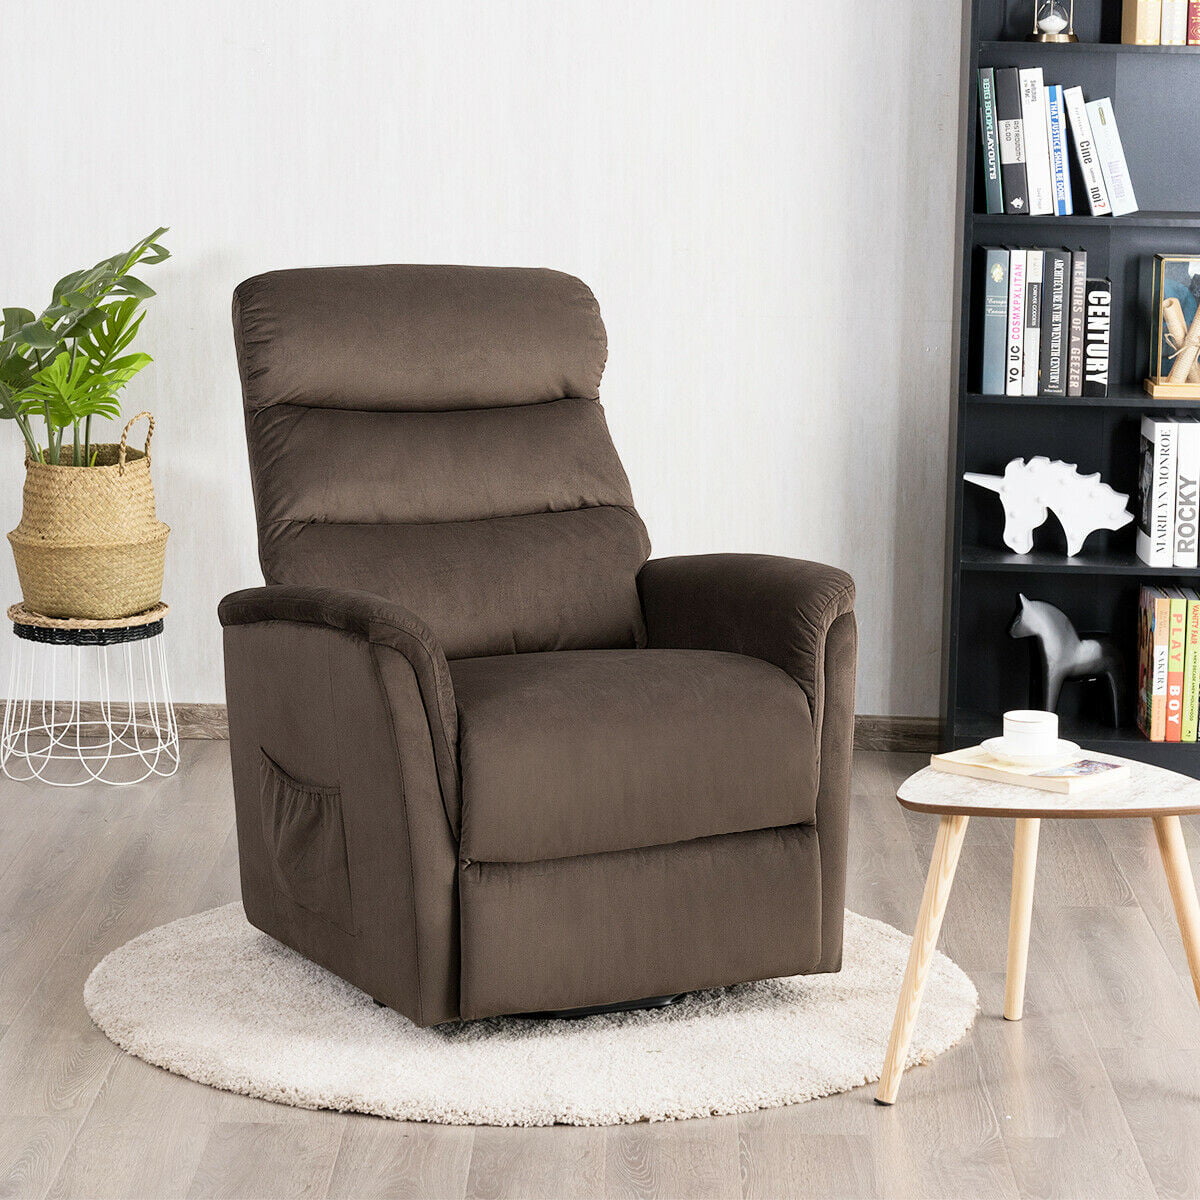 Costway Electric Lift Chair Recliner Reclining Chair Remote Living Room